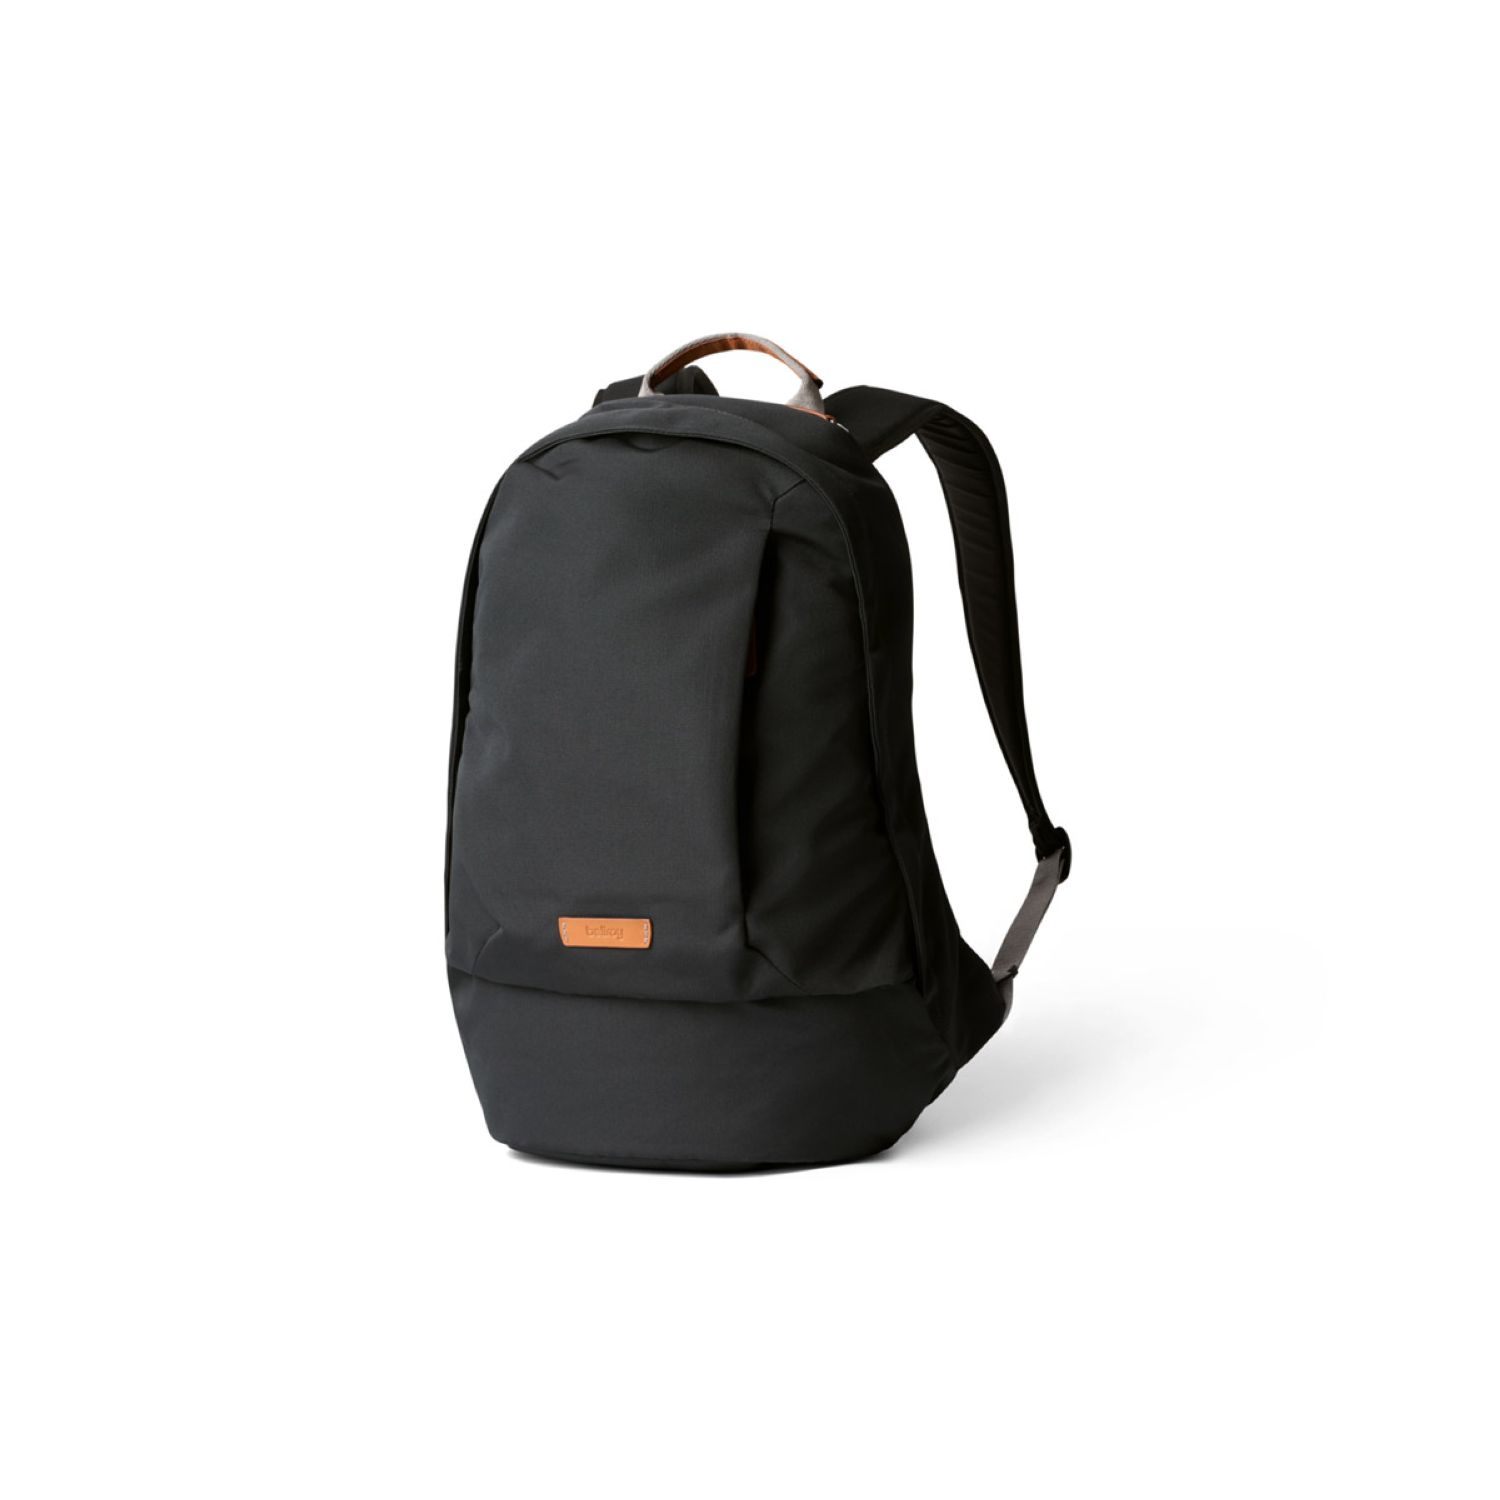 Bellroy-Classic-Backpack-Second-Edition-Slate-1-4.jpg